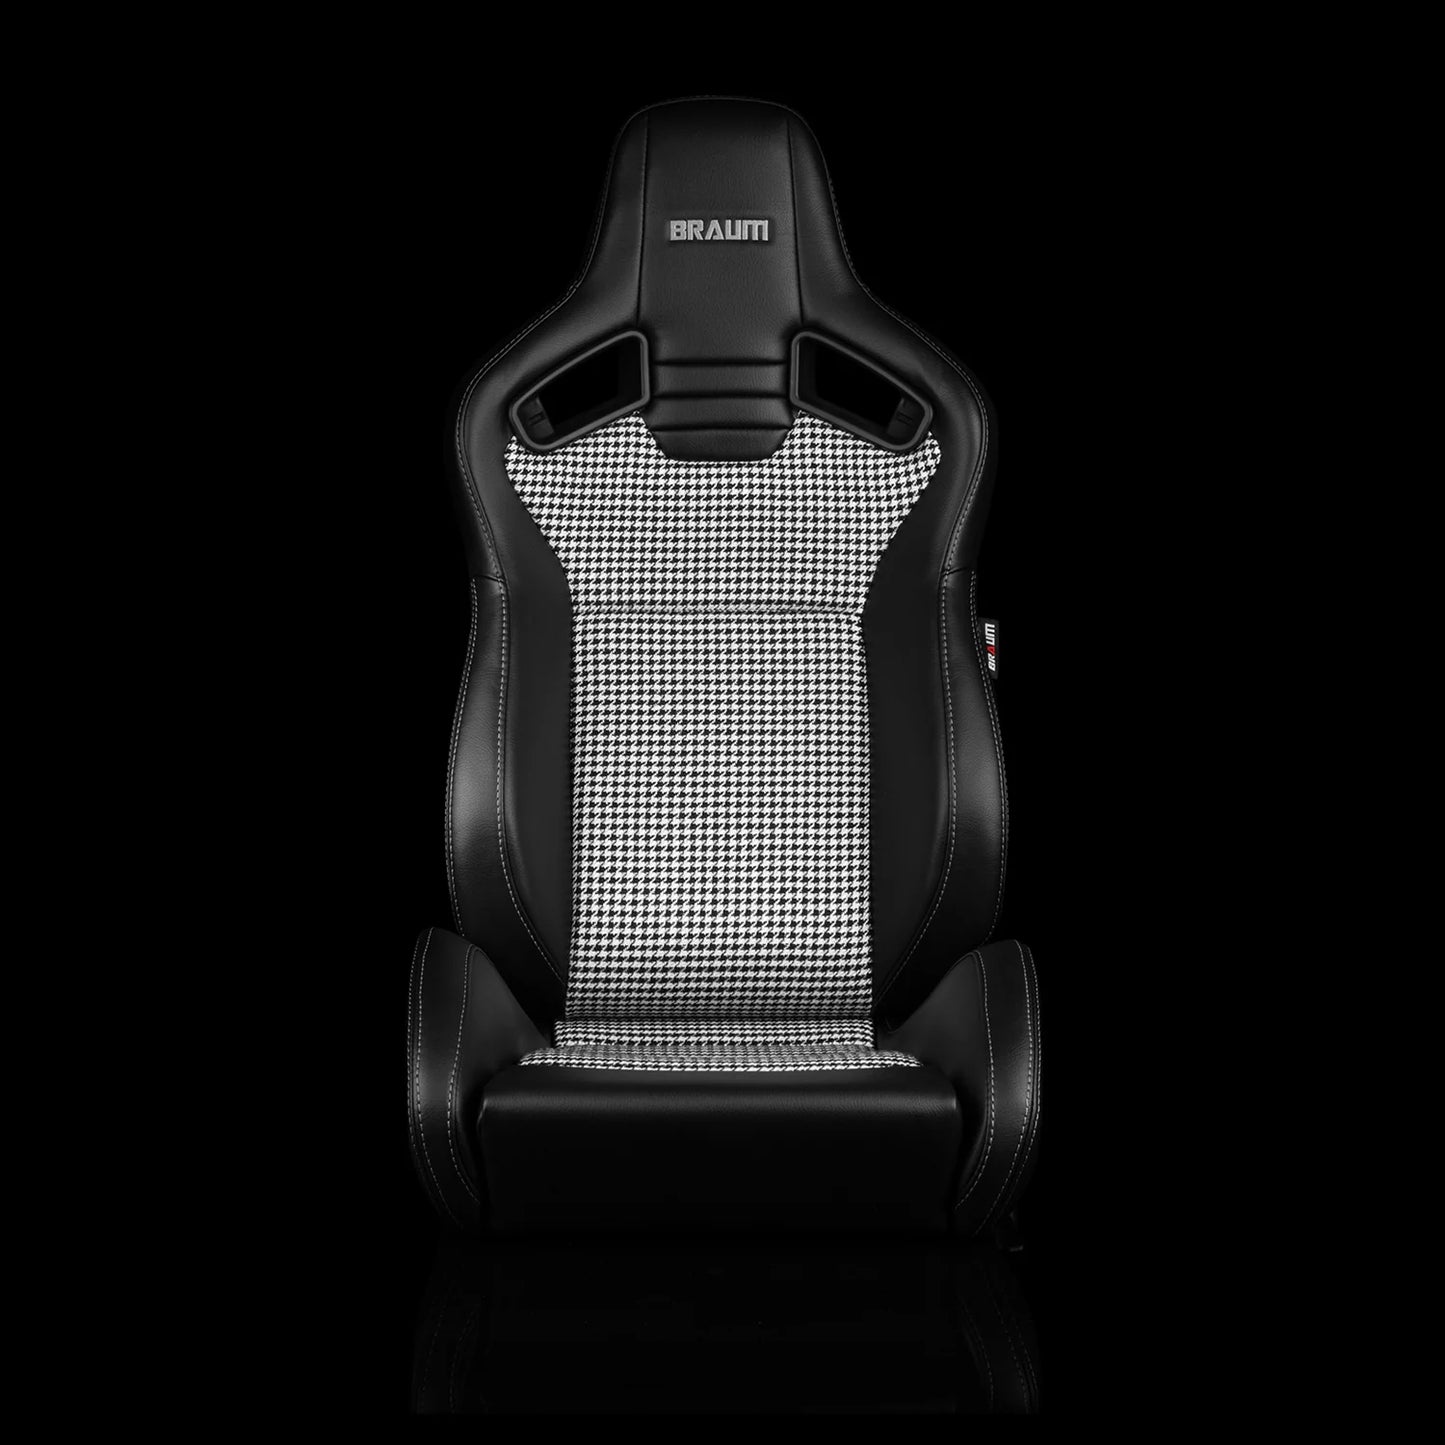 BRAUM ELITE V2 Series Sport Reclinable Seats (Black Leatherette | Houndstooth Fabric) – Priced Per Pair